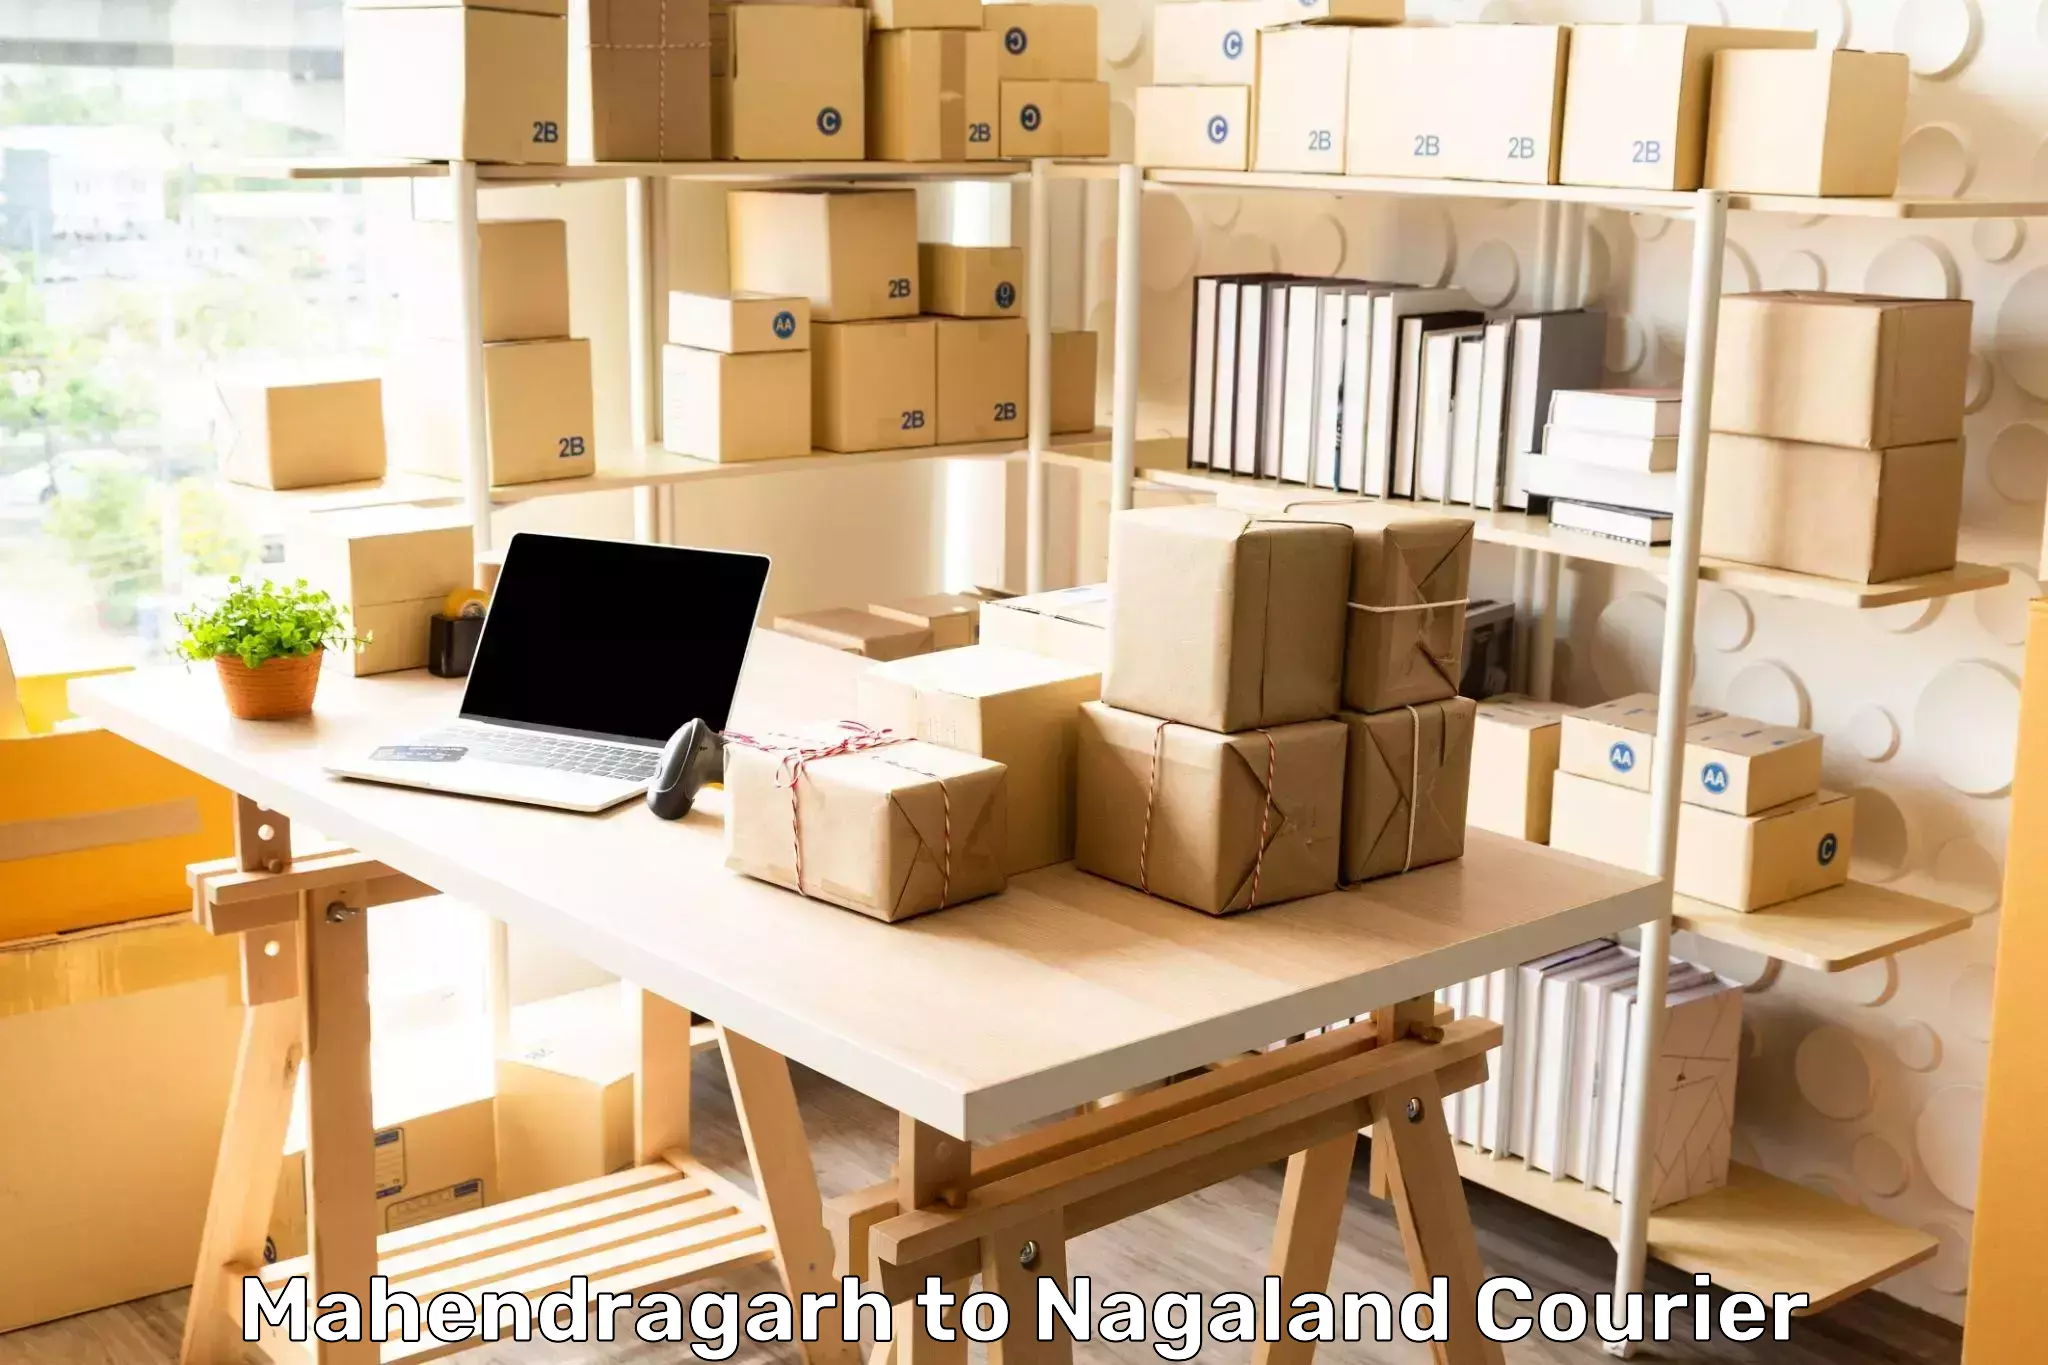 Professional courier handling in Mahendragarh to Nagaland